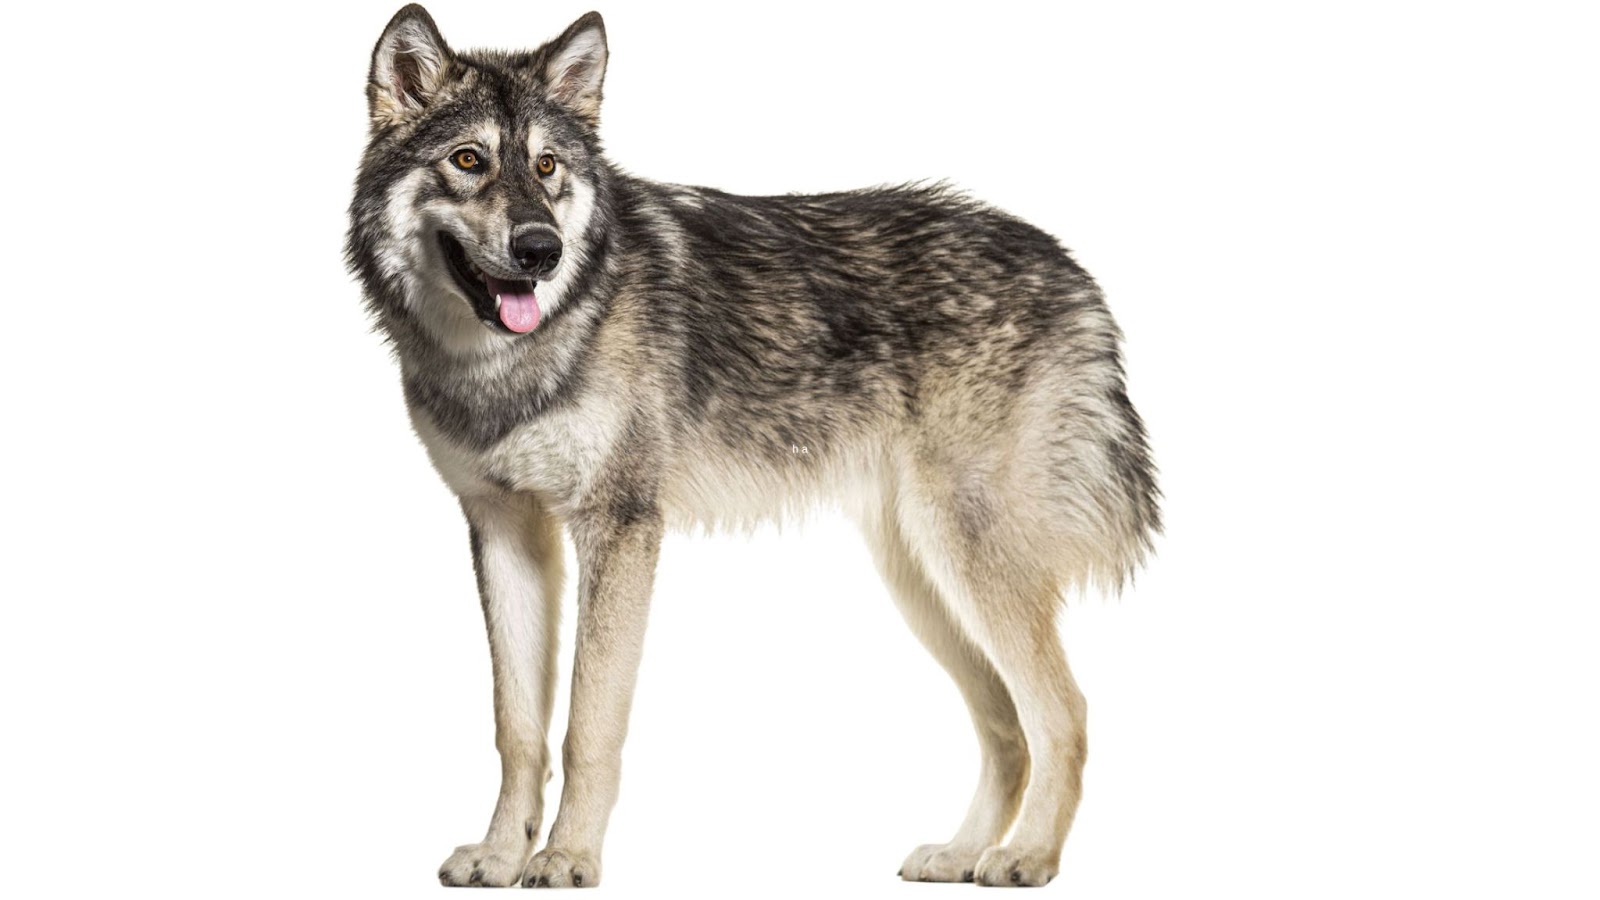 standing wolf like northern inuit dog on white background agout wolf color